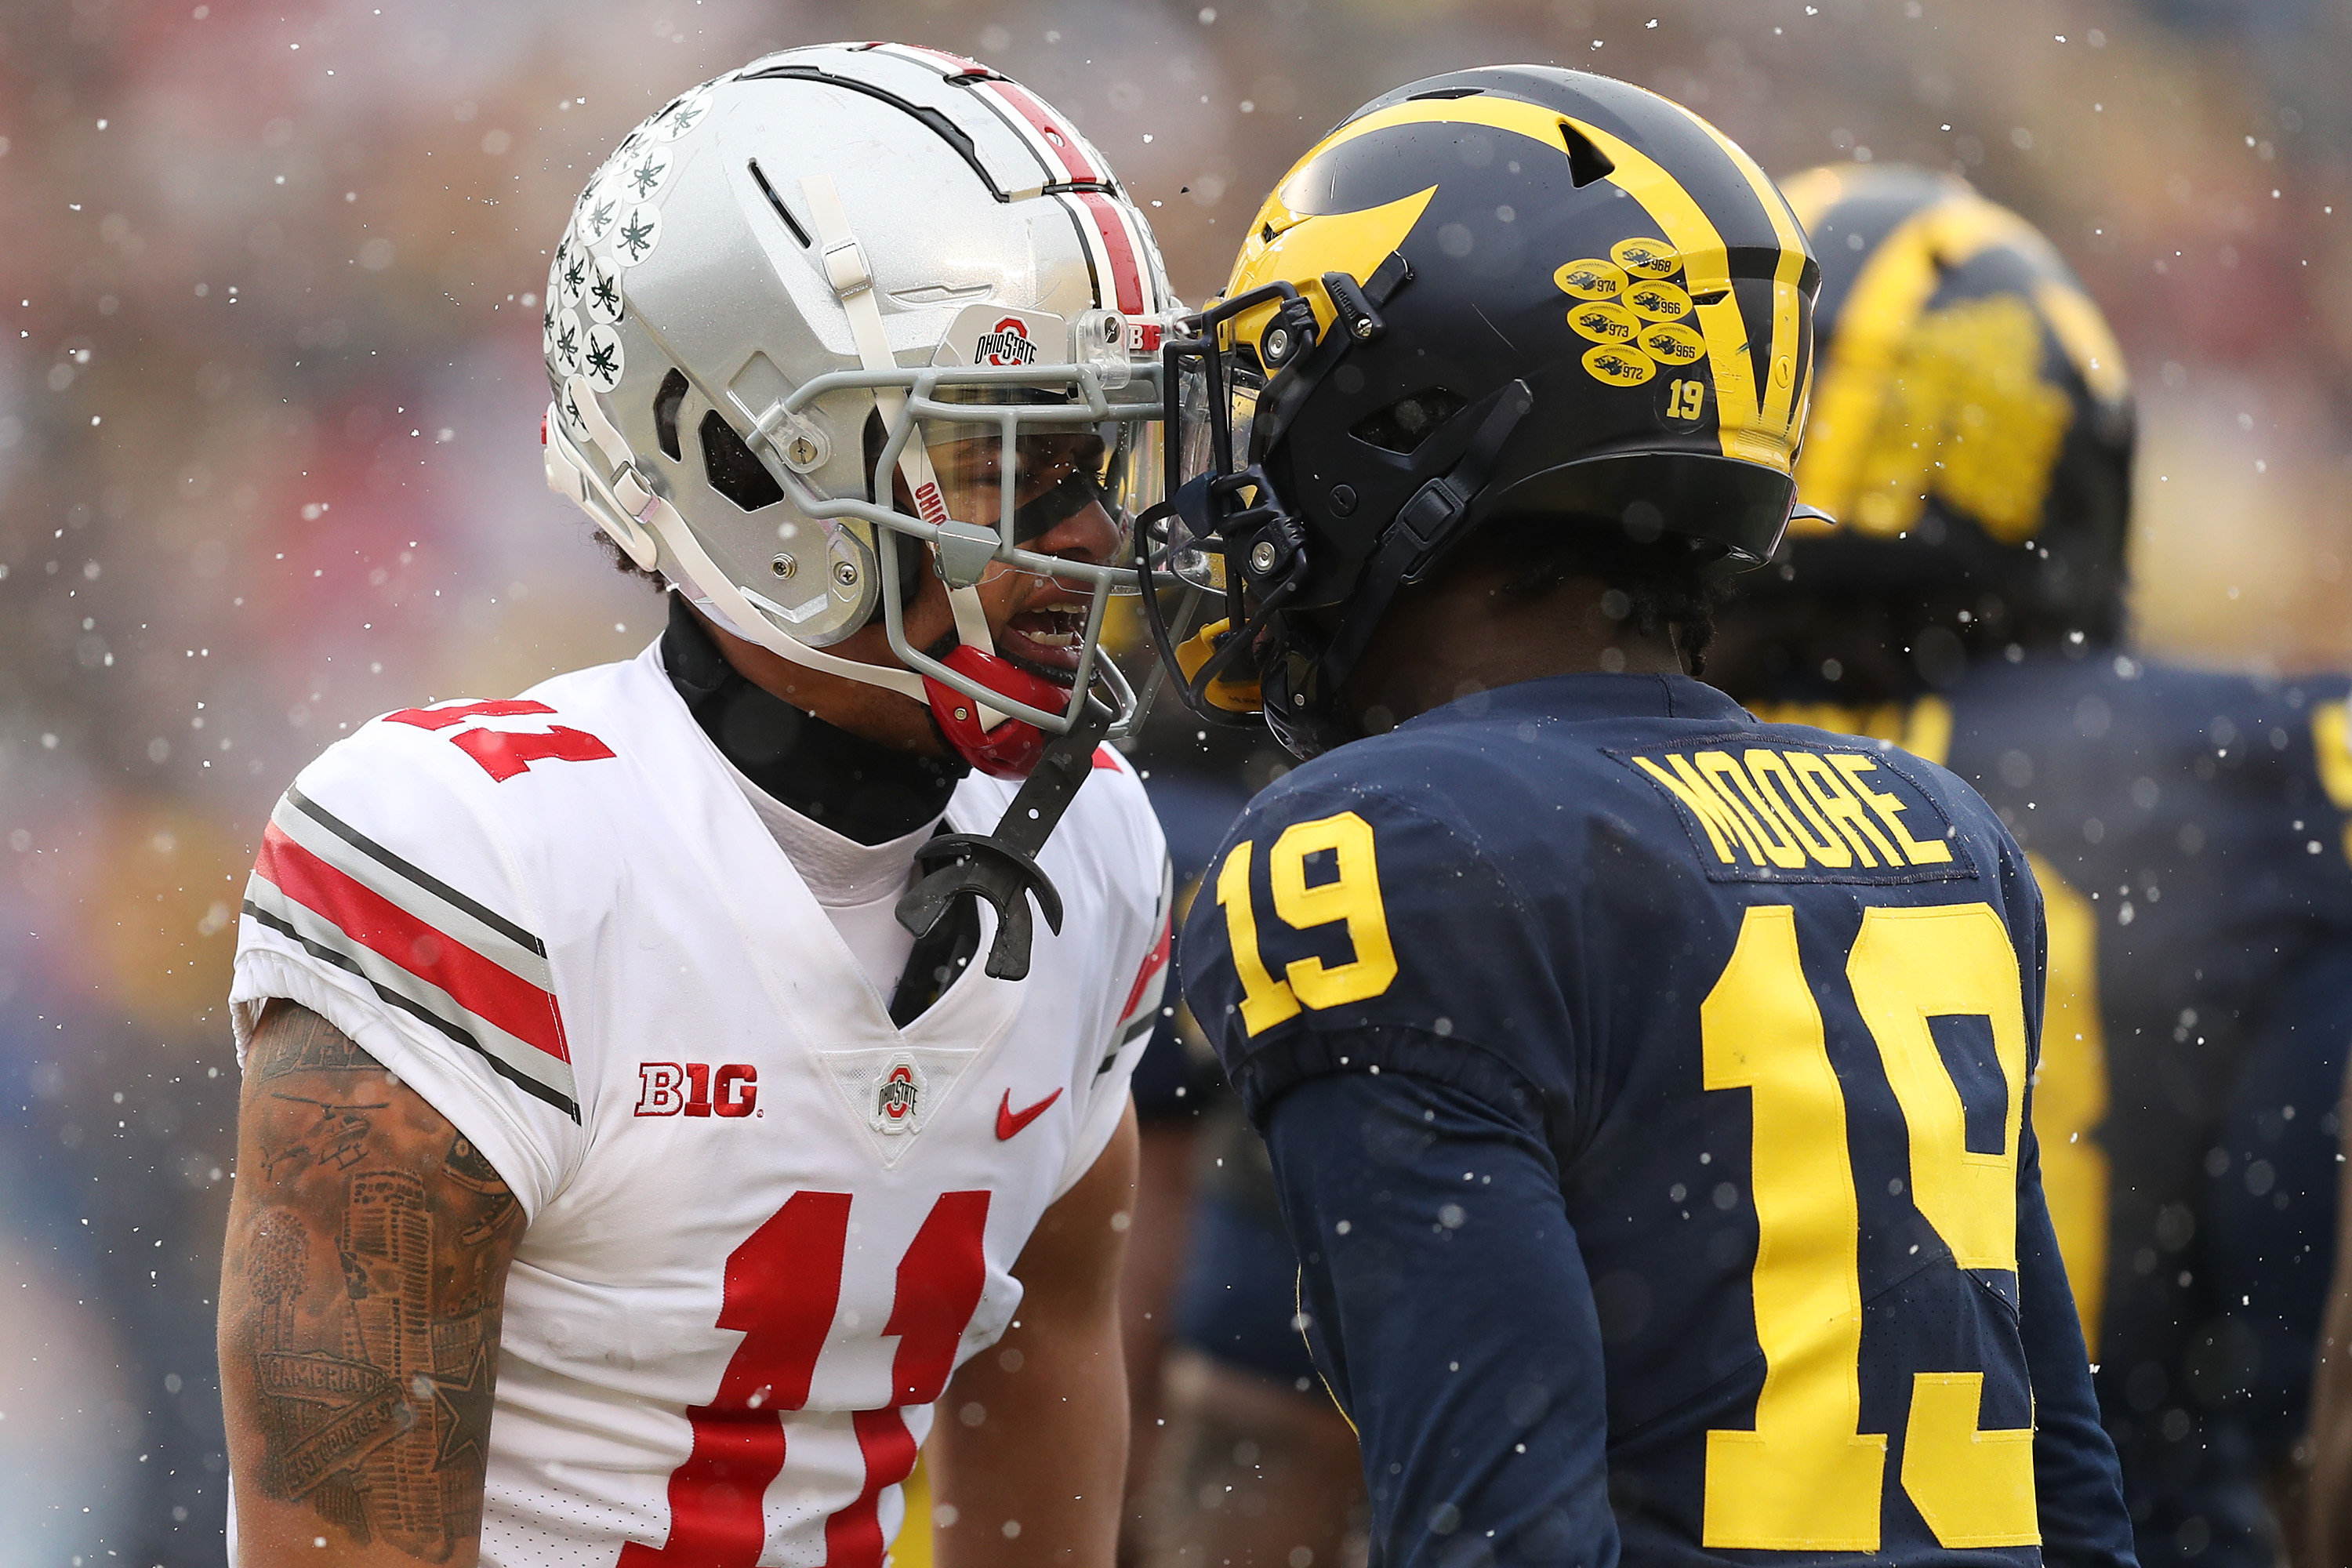 Michigan and Ohio State have made it to The Game undefeated after